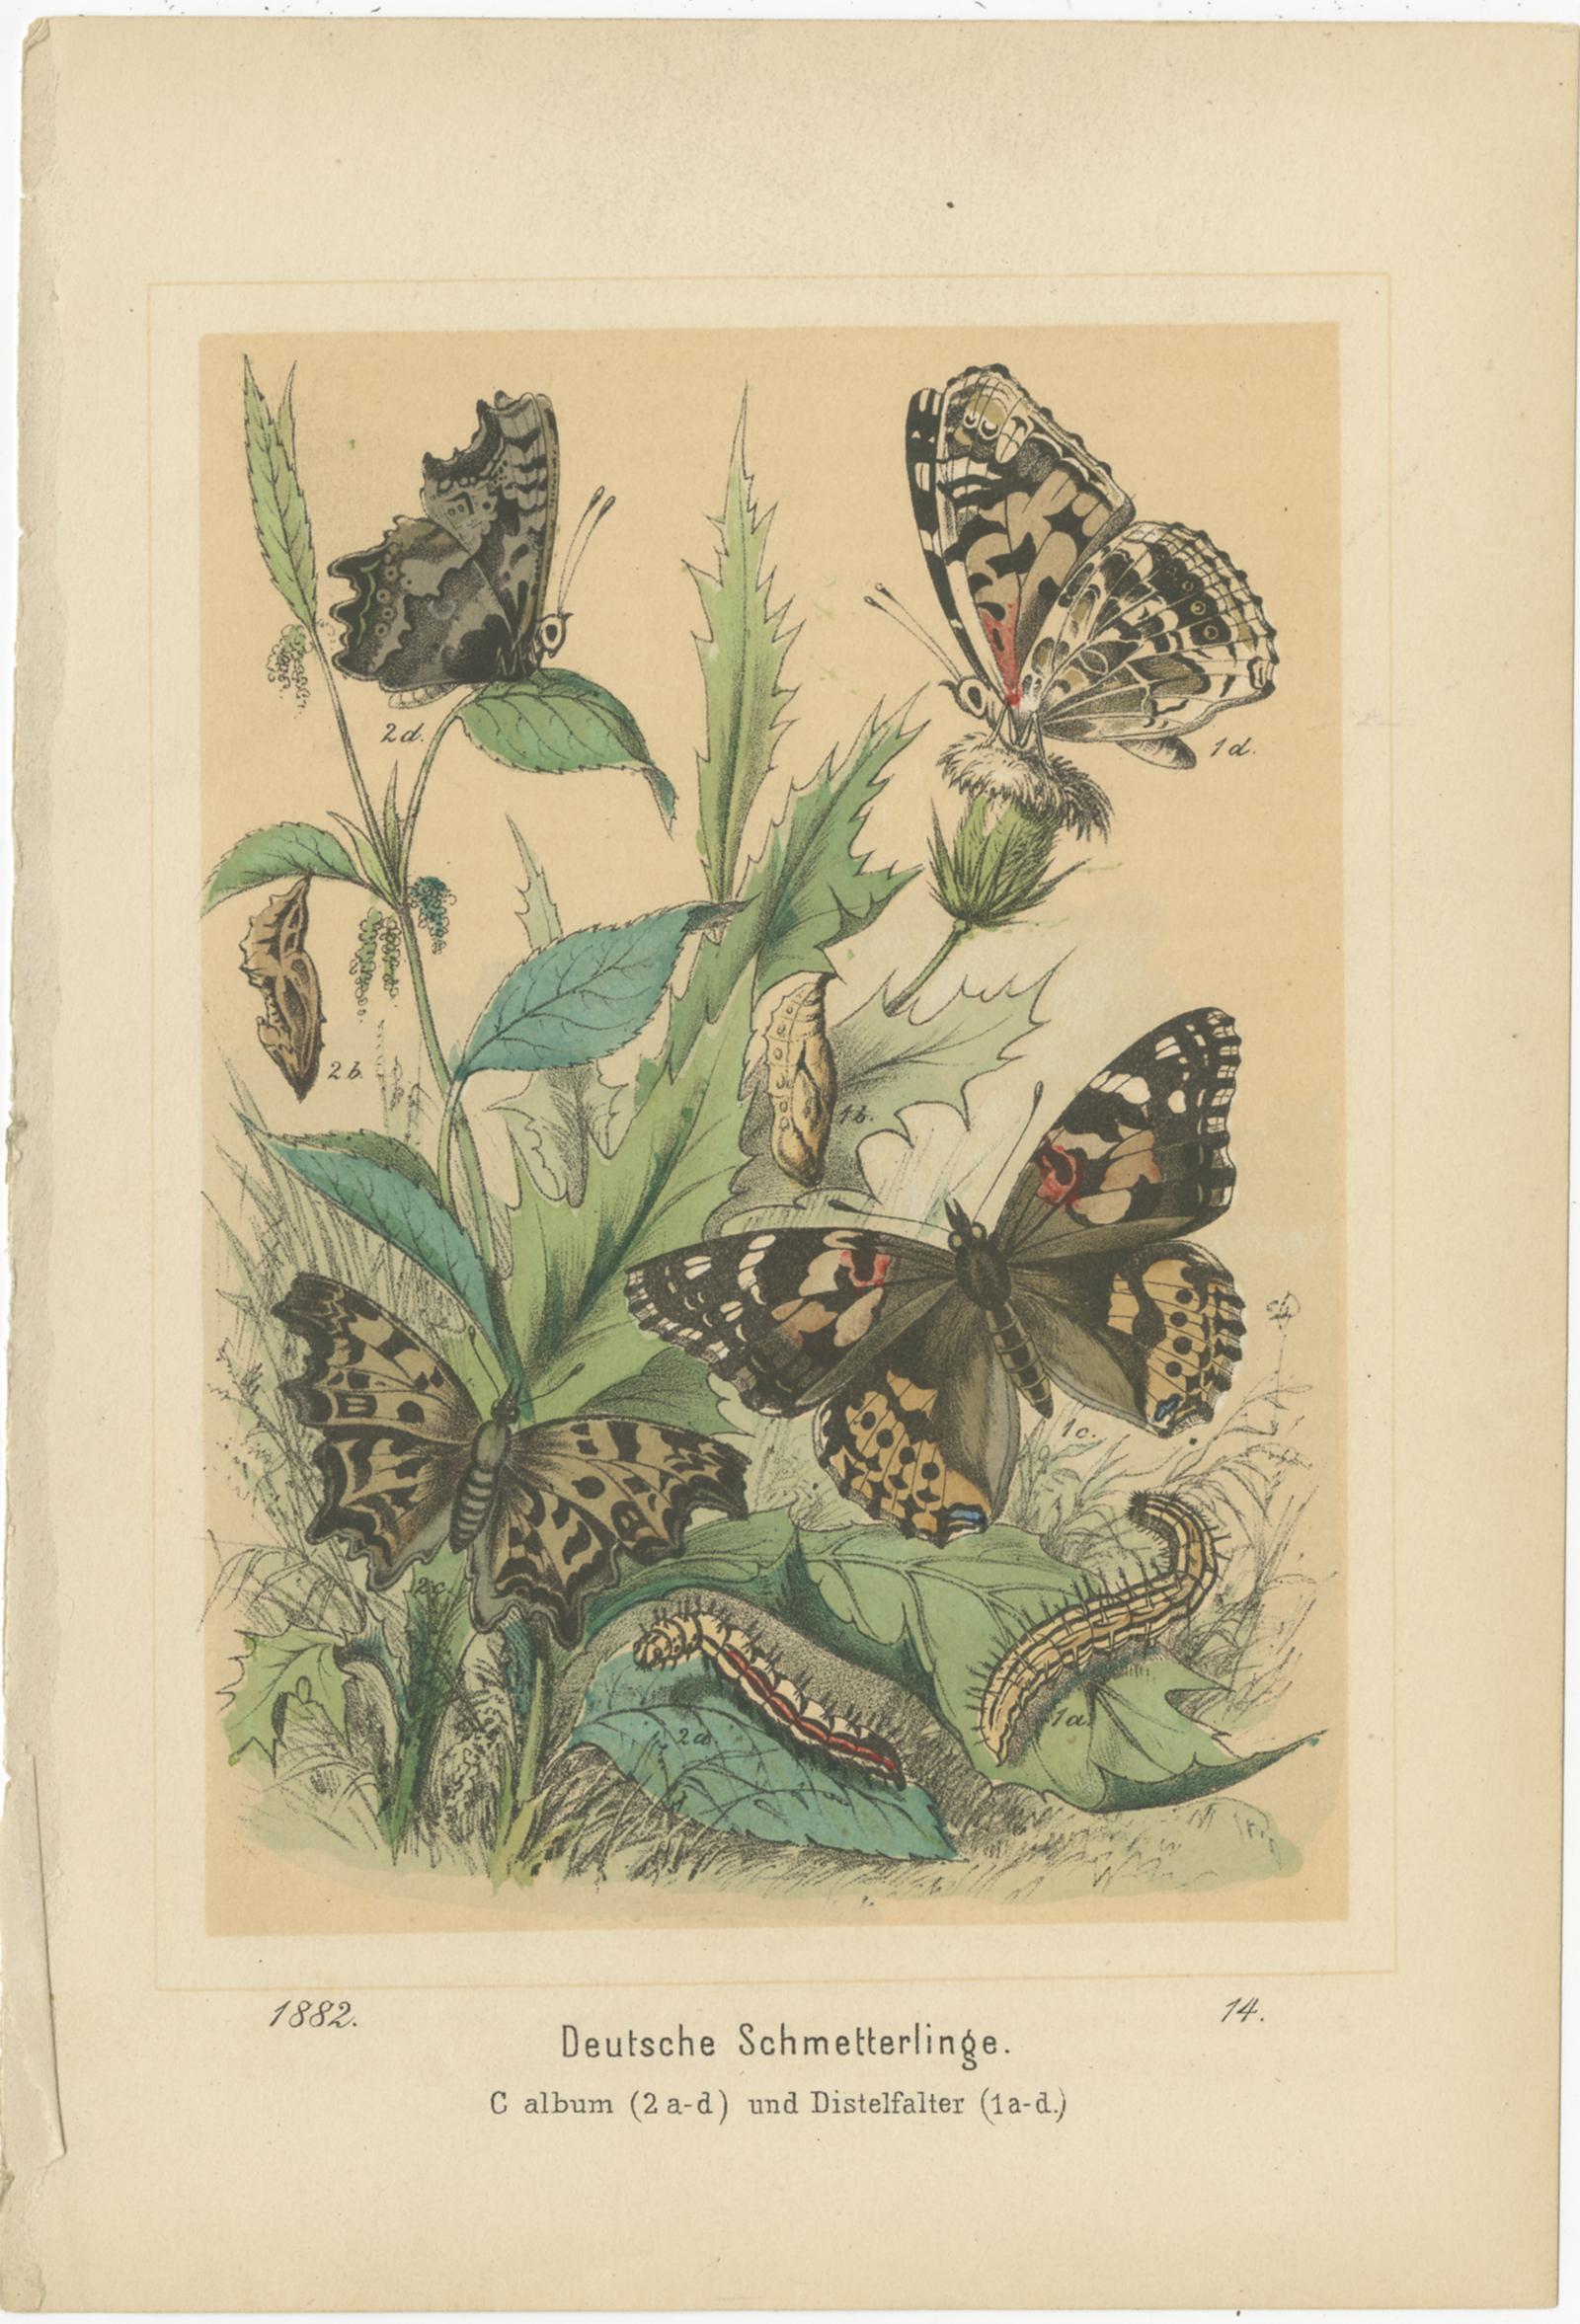 Antique print titled 'Deutsche Schmetterlinge'. Original old print of German butterflies. Source unknown, to be determined. Published circa 1890.